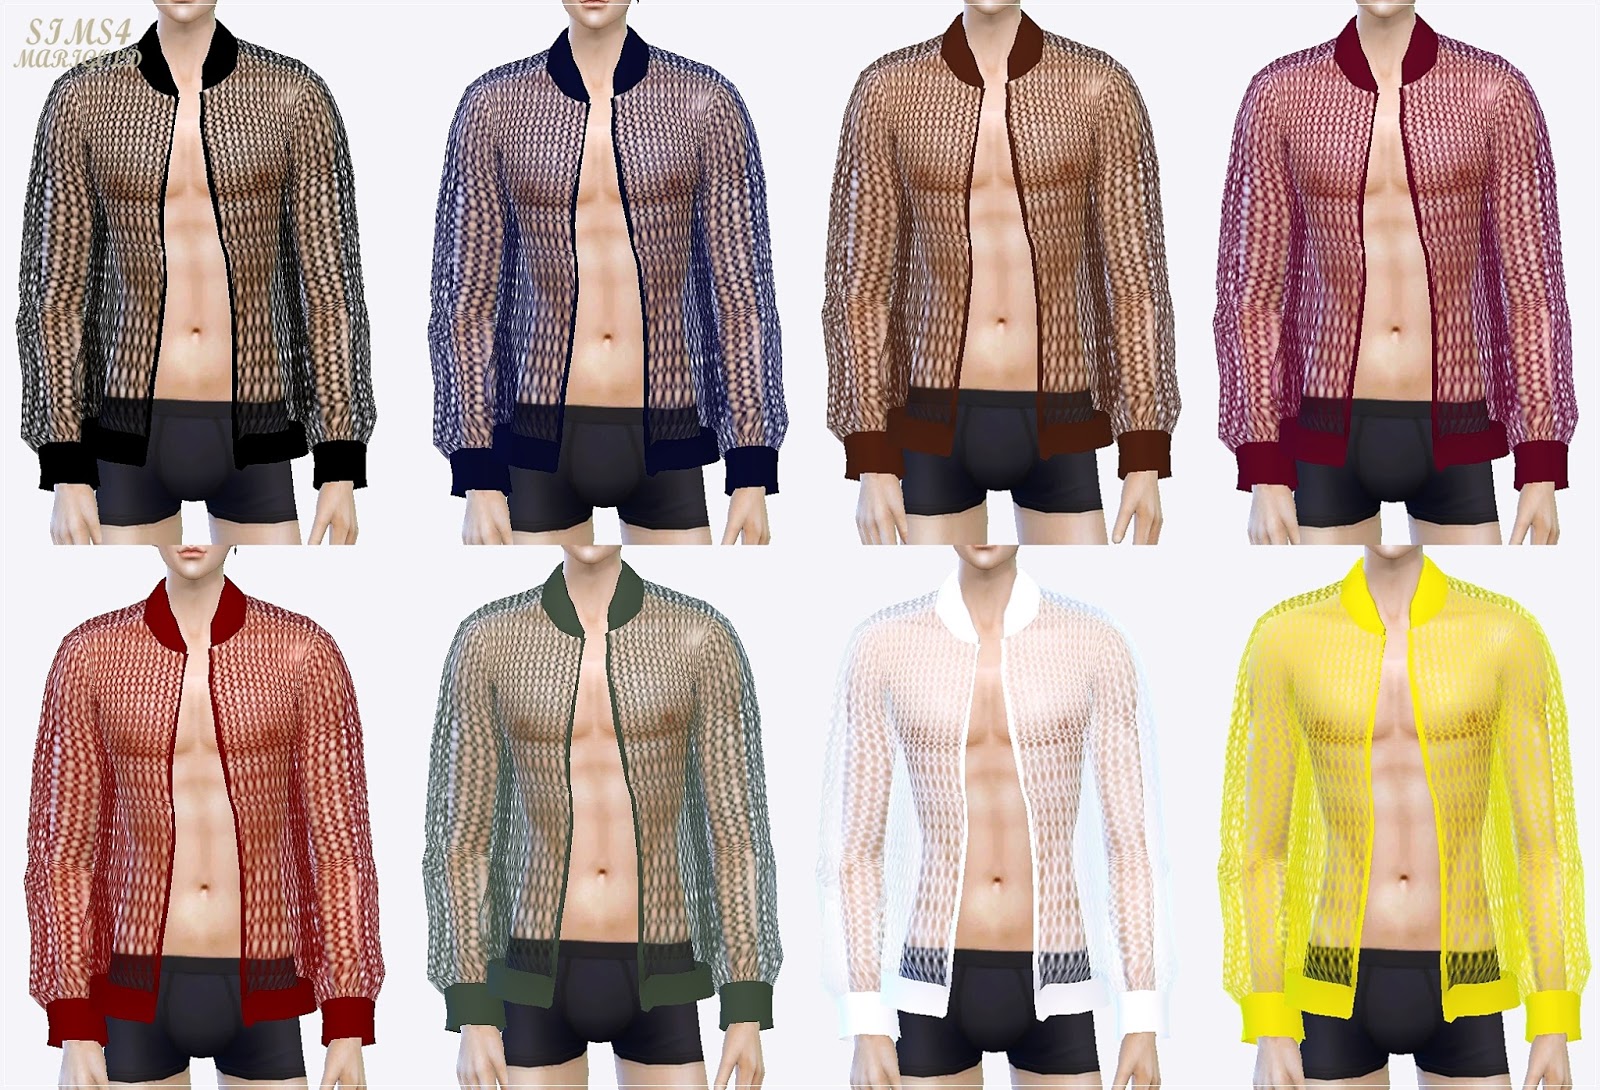 Accessory Mesh Jacket for Males & Females by Marigold. 